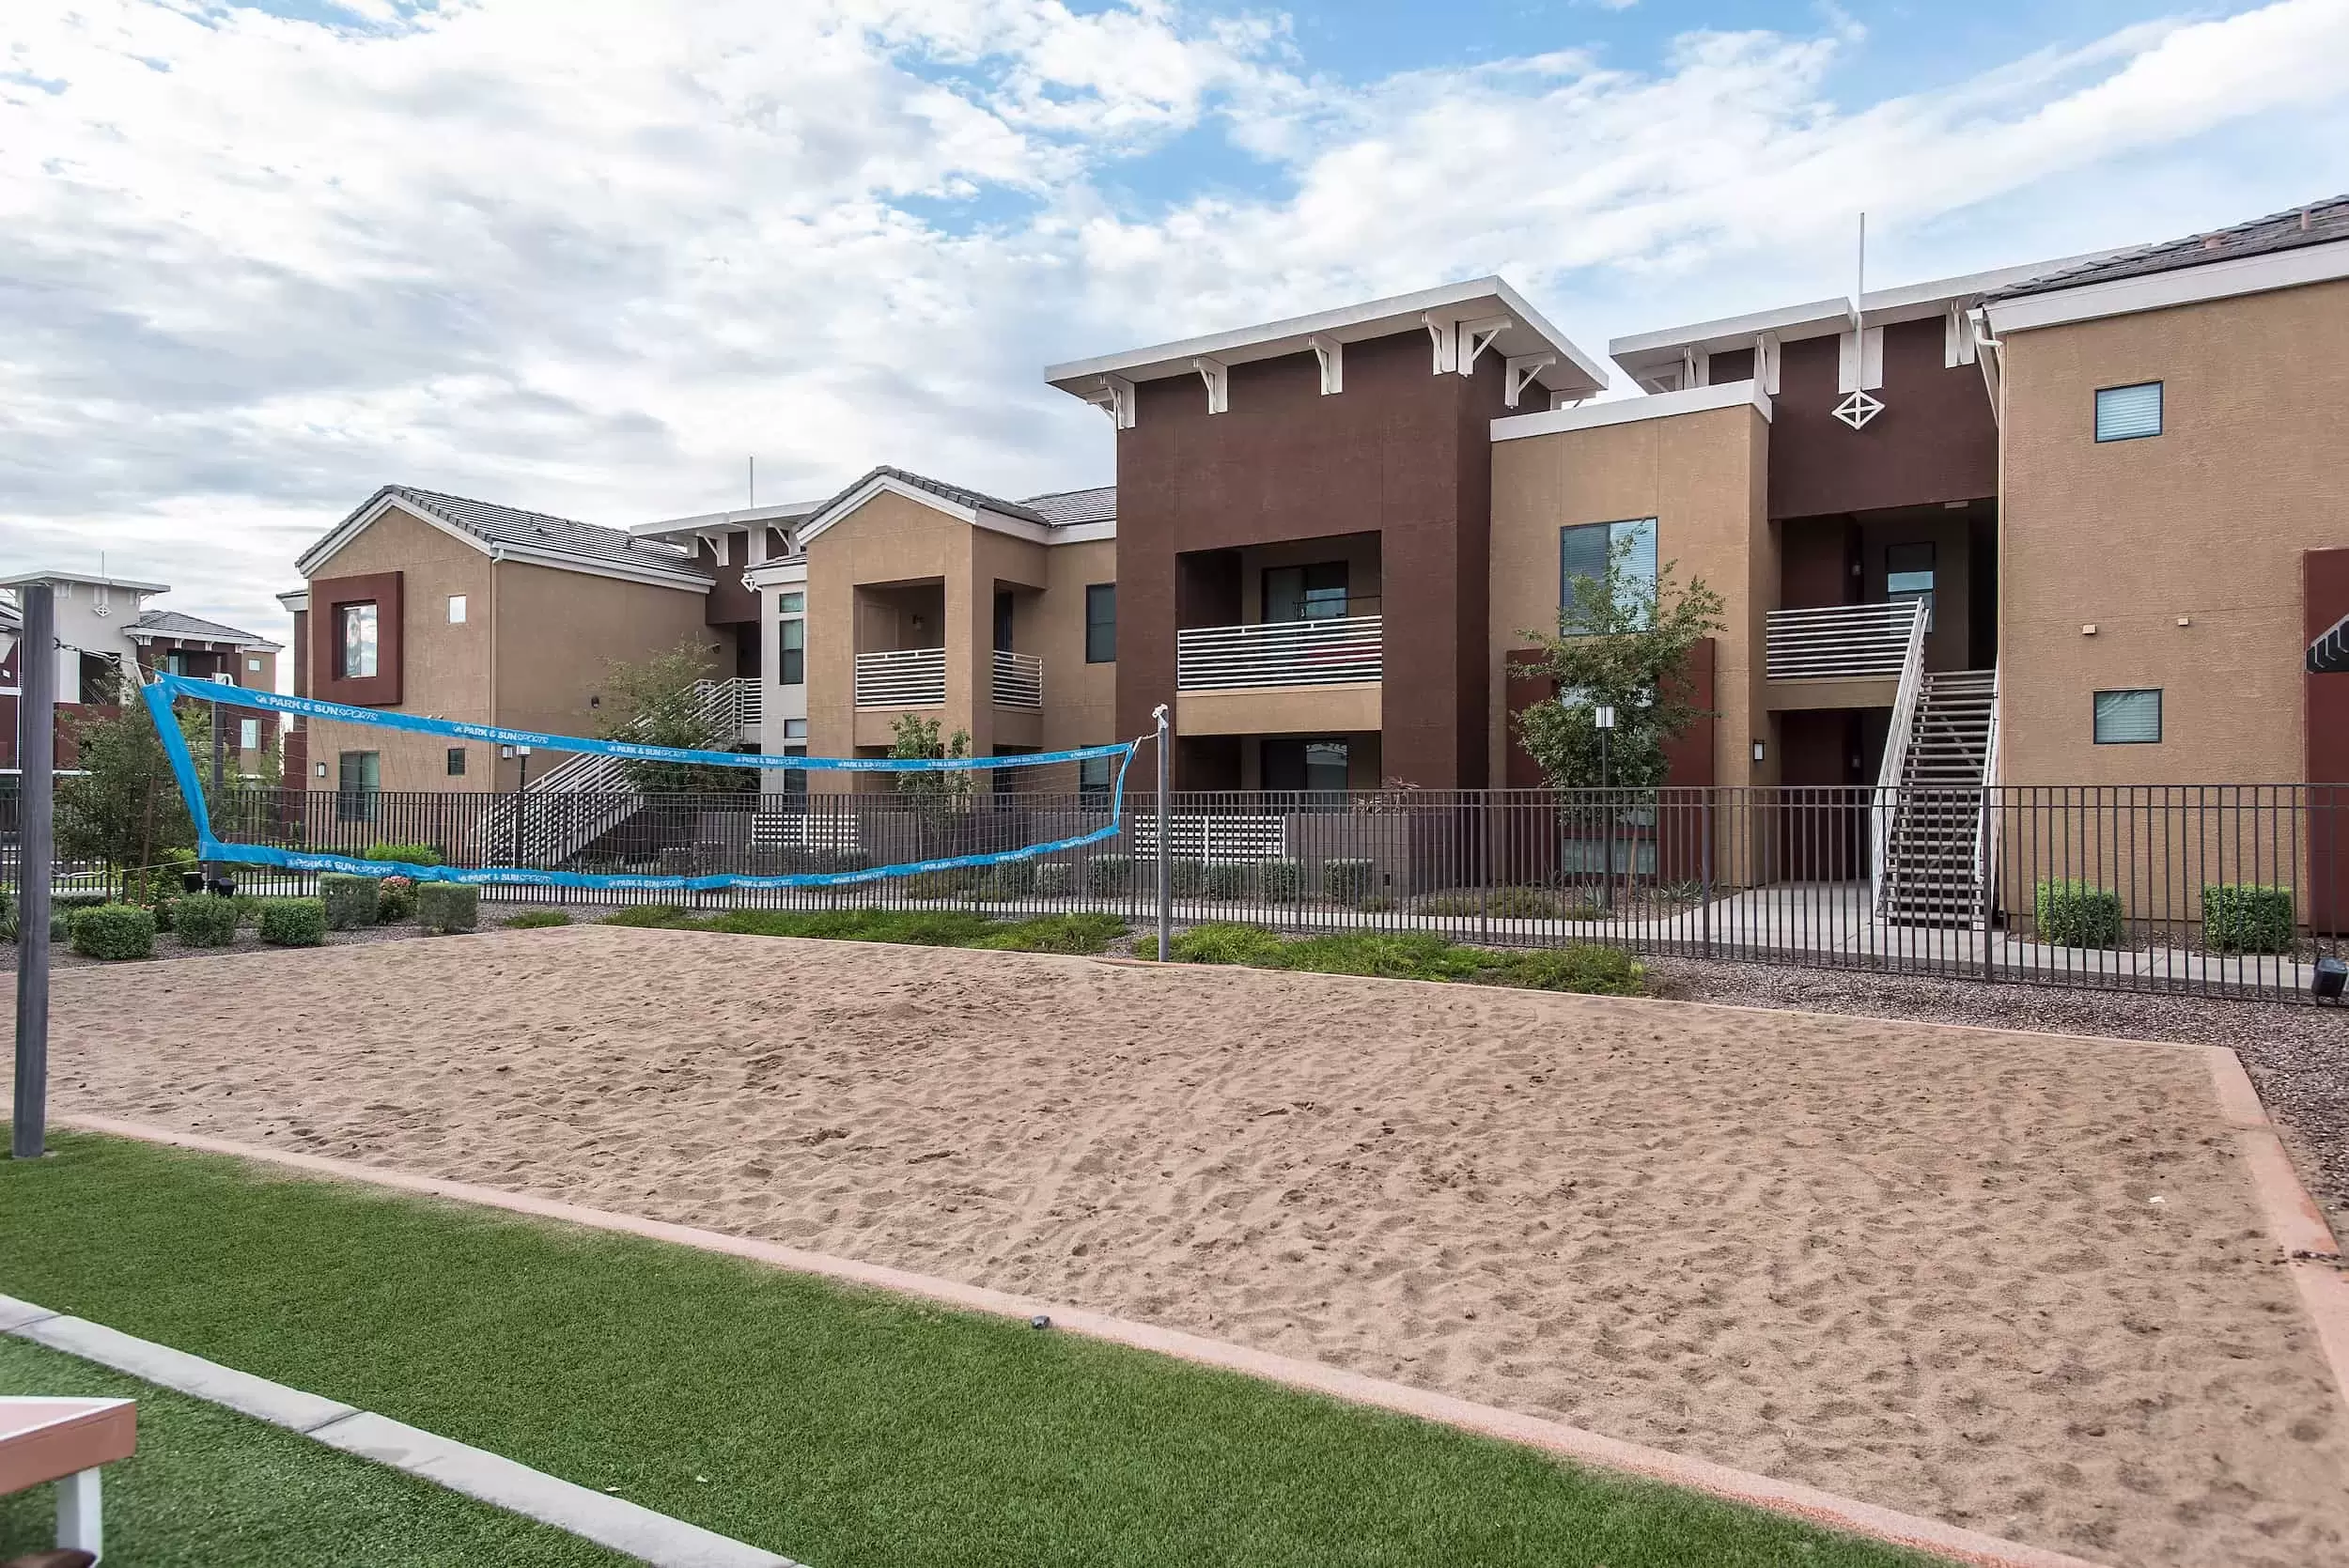 A sand volleyball court in front of apartment buildings.